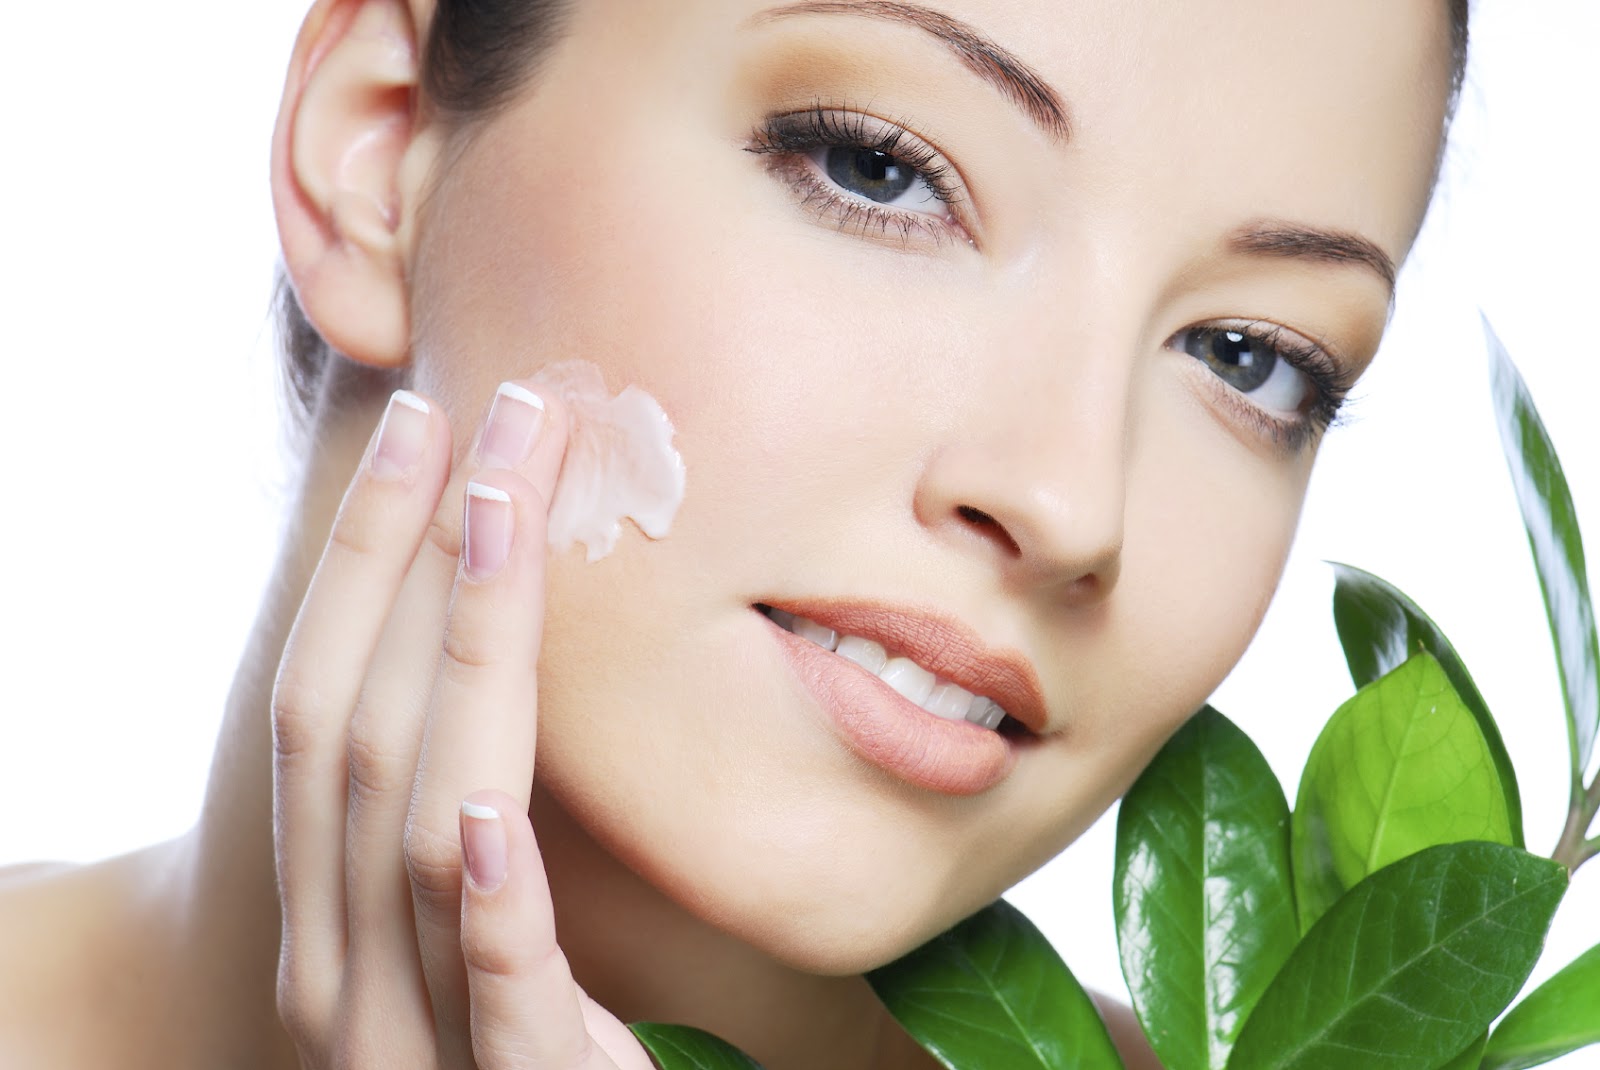 It is Best that you Follow the Right Home Made Skin Care Solutions